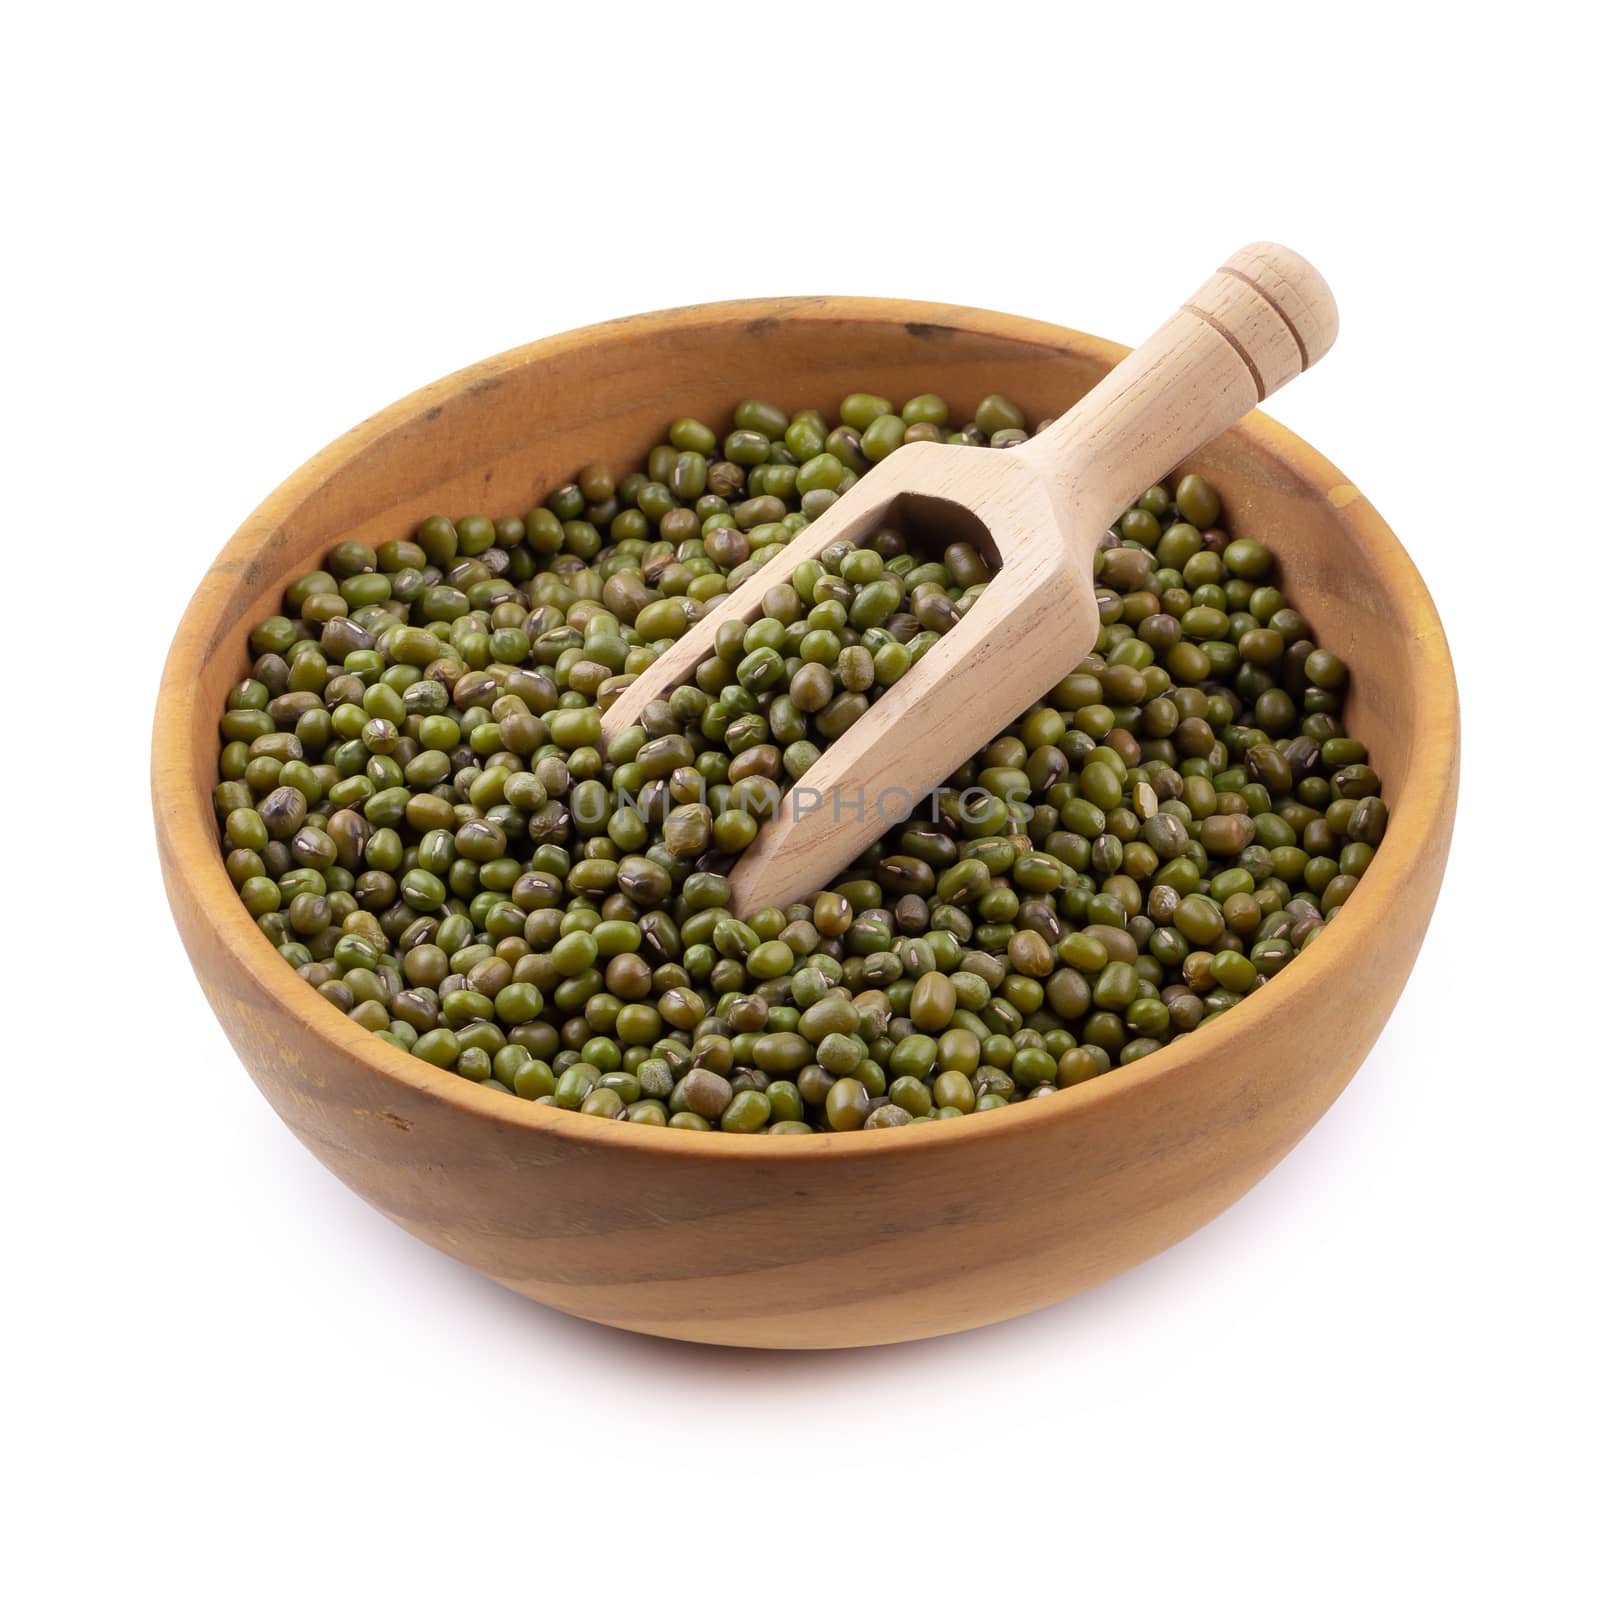 Raw mung bean or green bean in a wooden bowl isolated on white background.